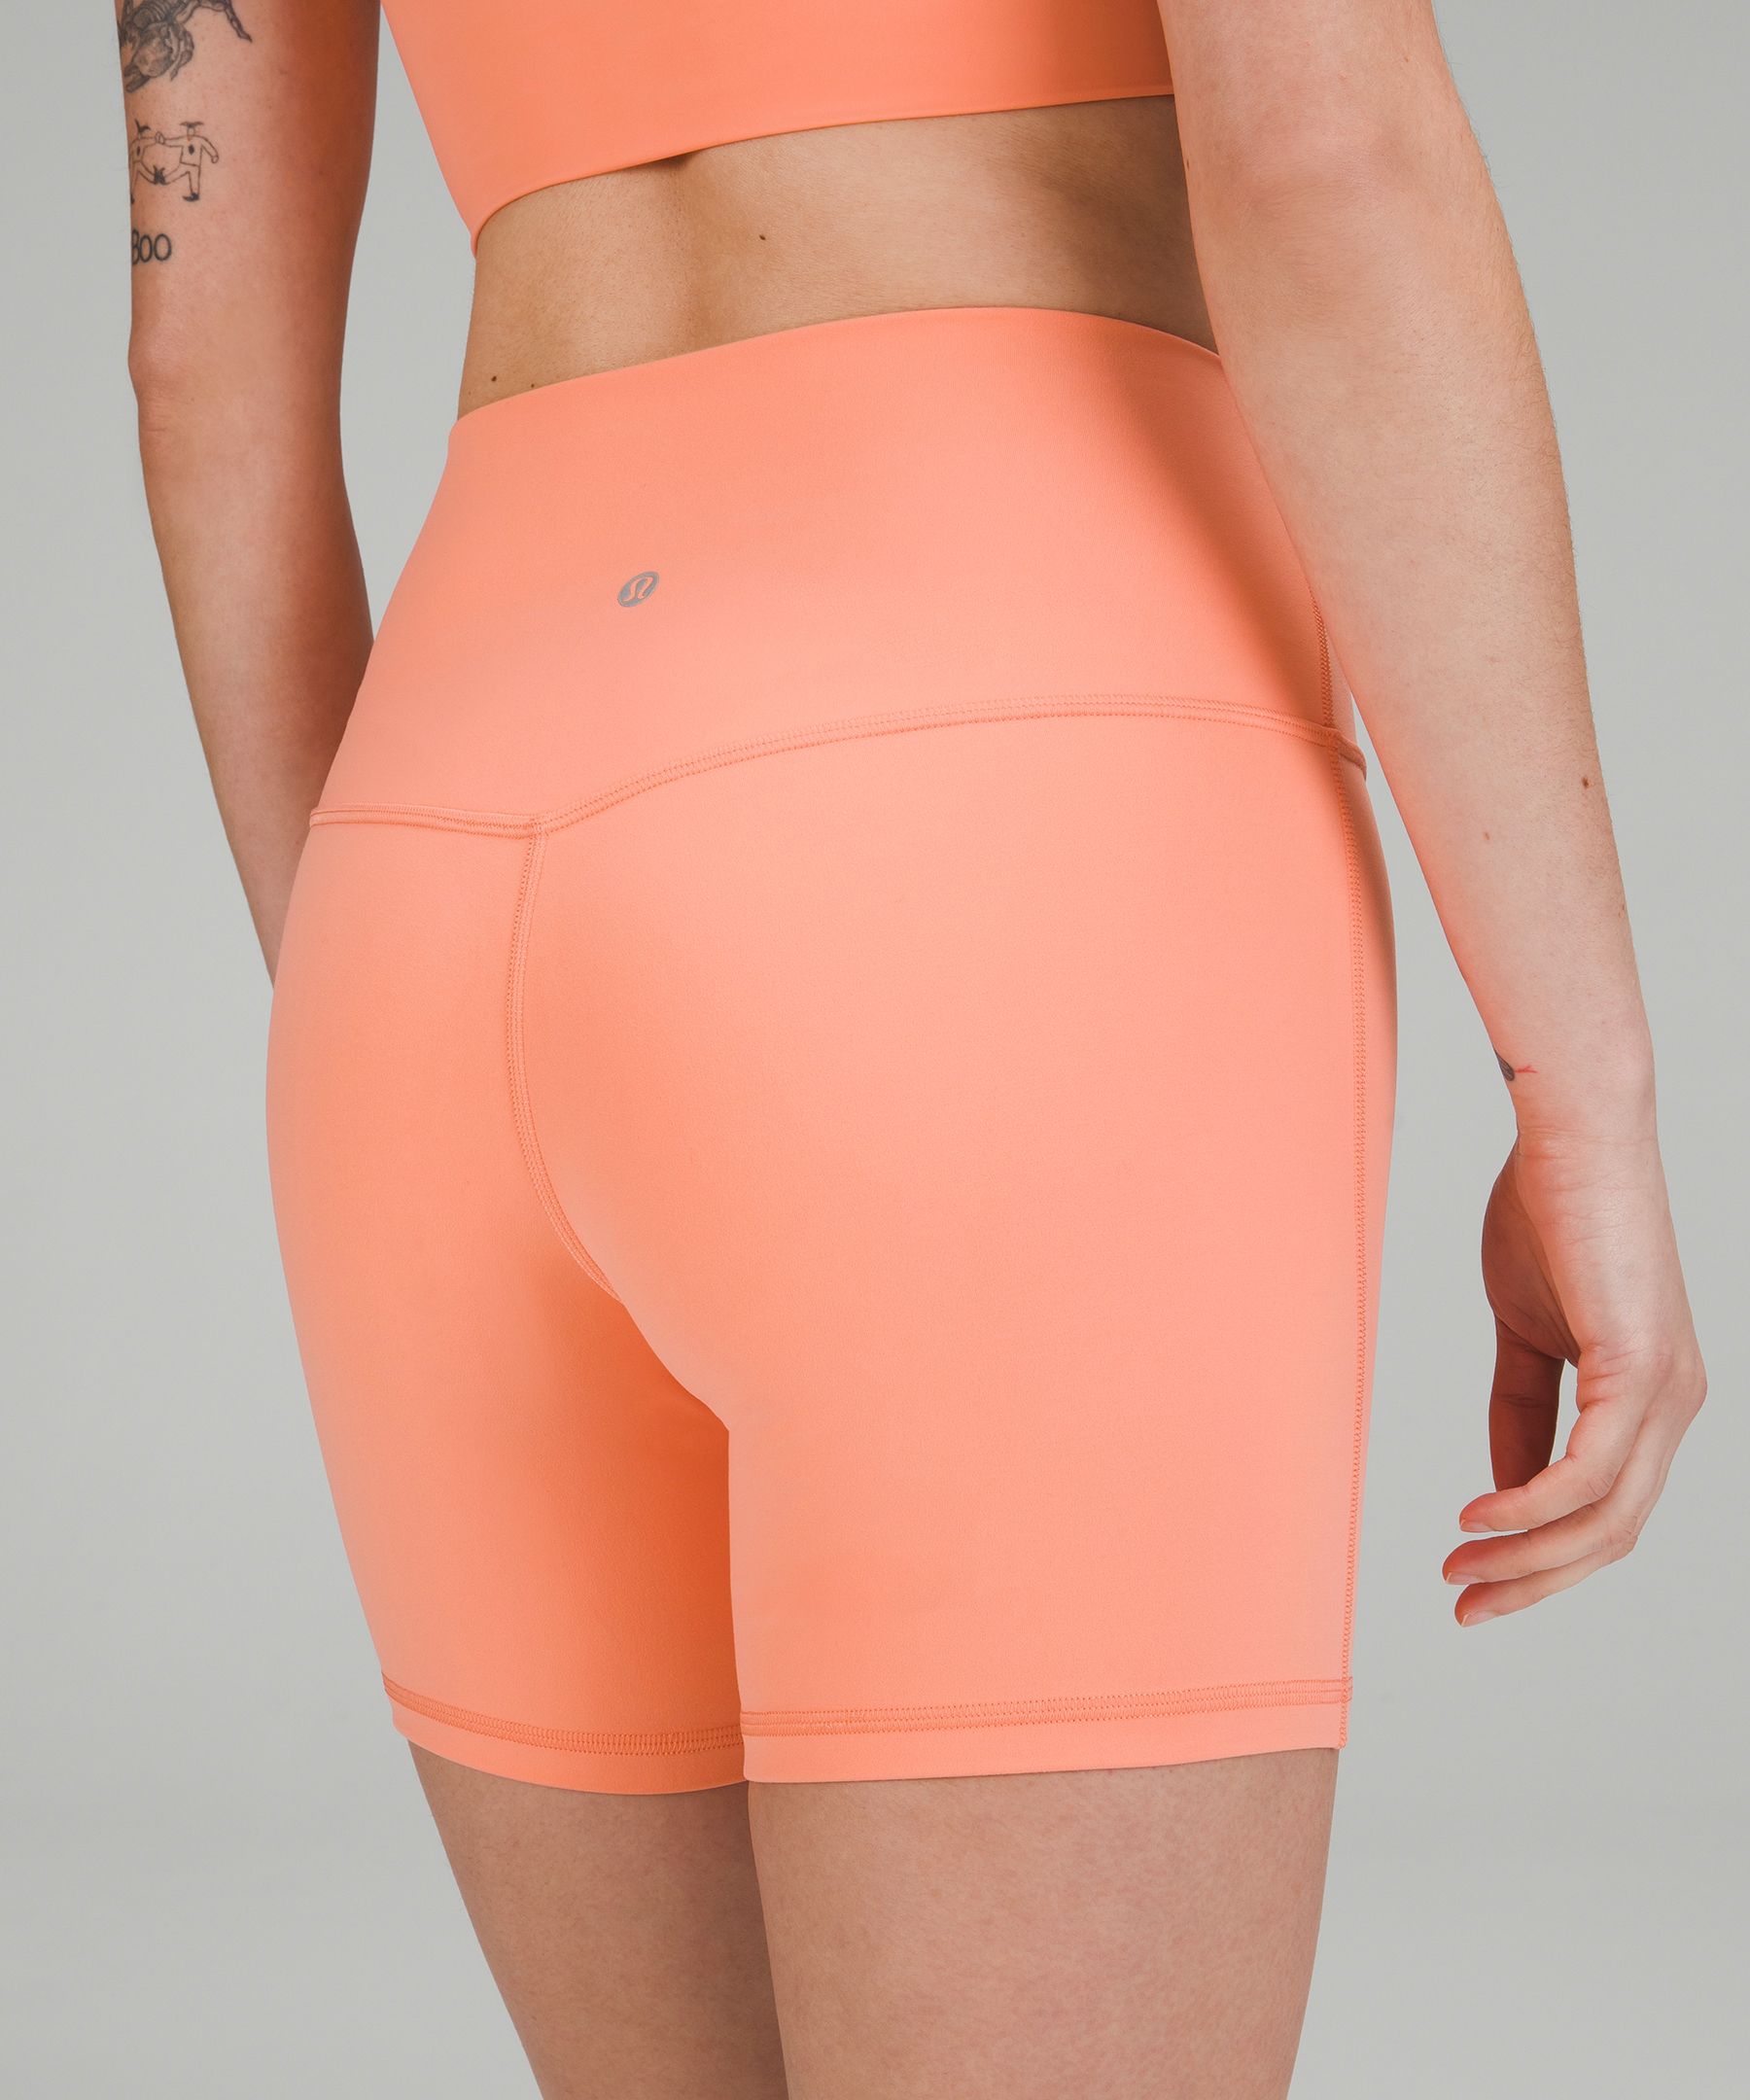 What length of Align Shorts do you think is more flattering on? 6” or 8”?  Wearing Energy Bra in Dark Prism Pink, Black 6” Align Shorts and Jewel  Emboss Short 8” : r/lululemon